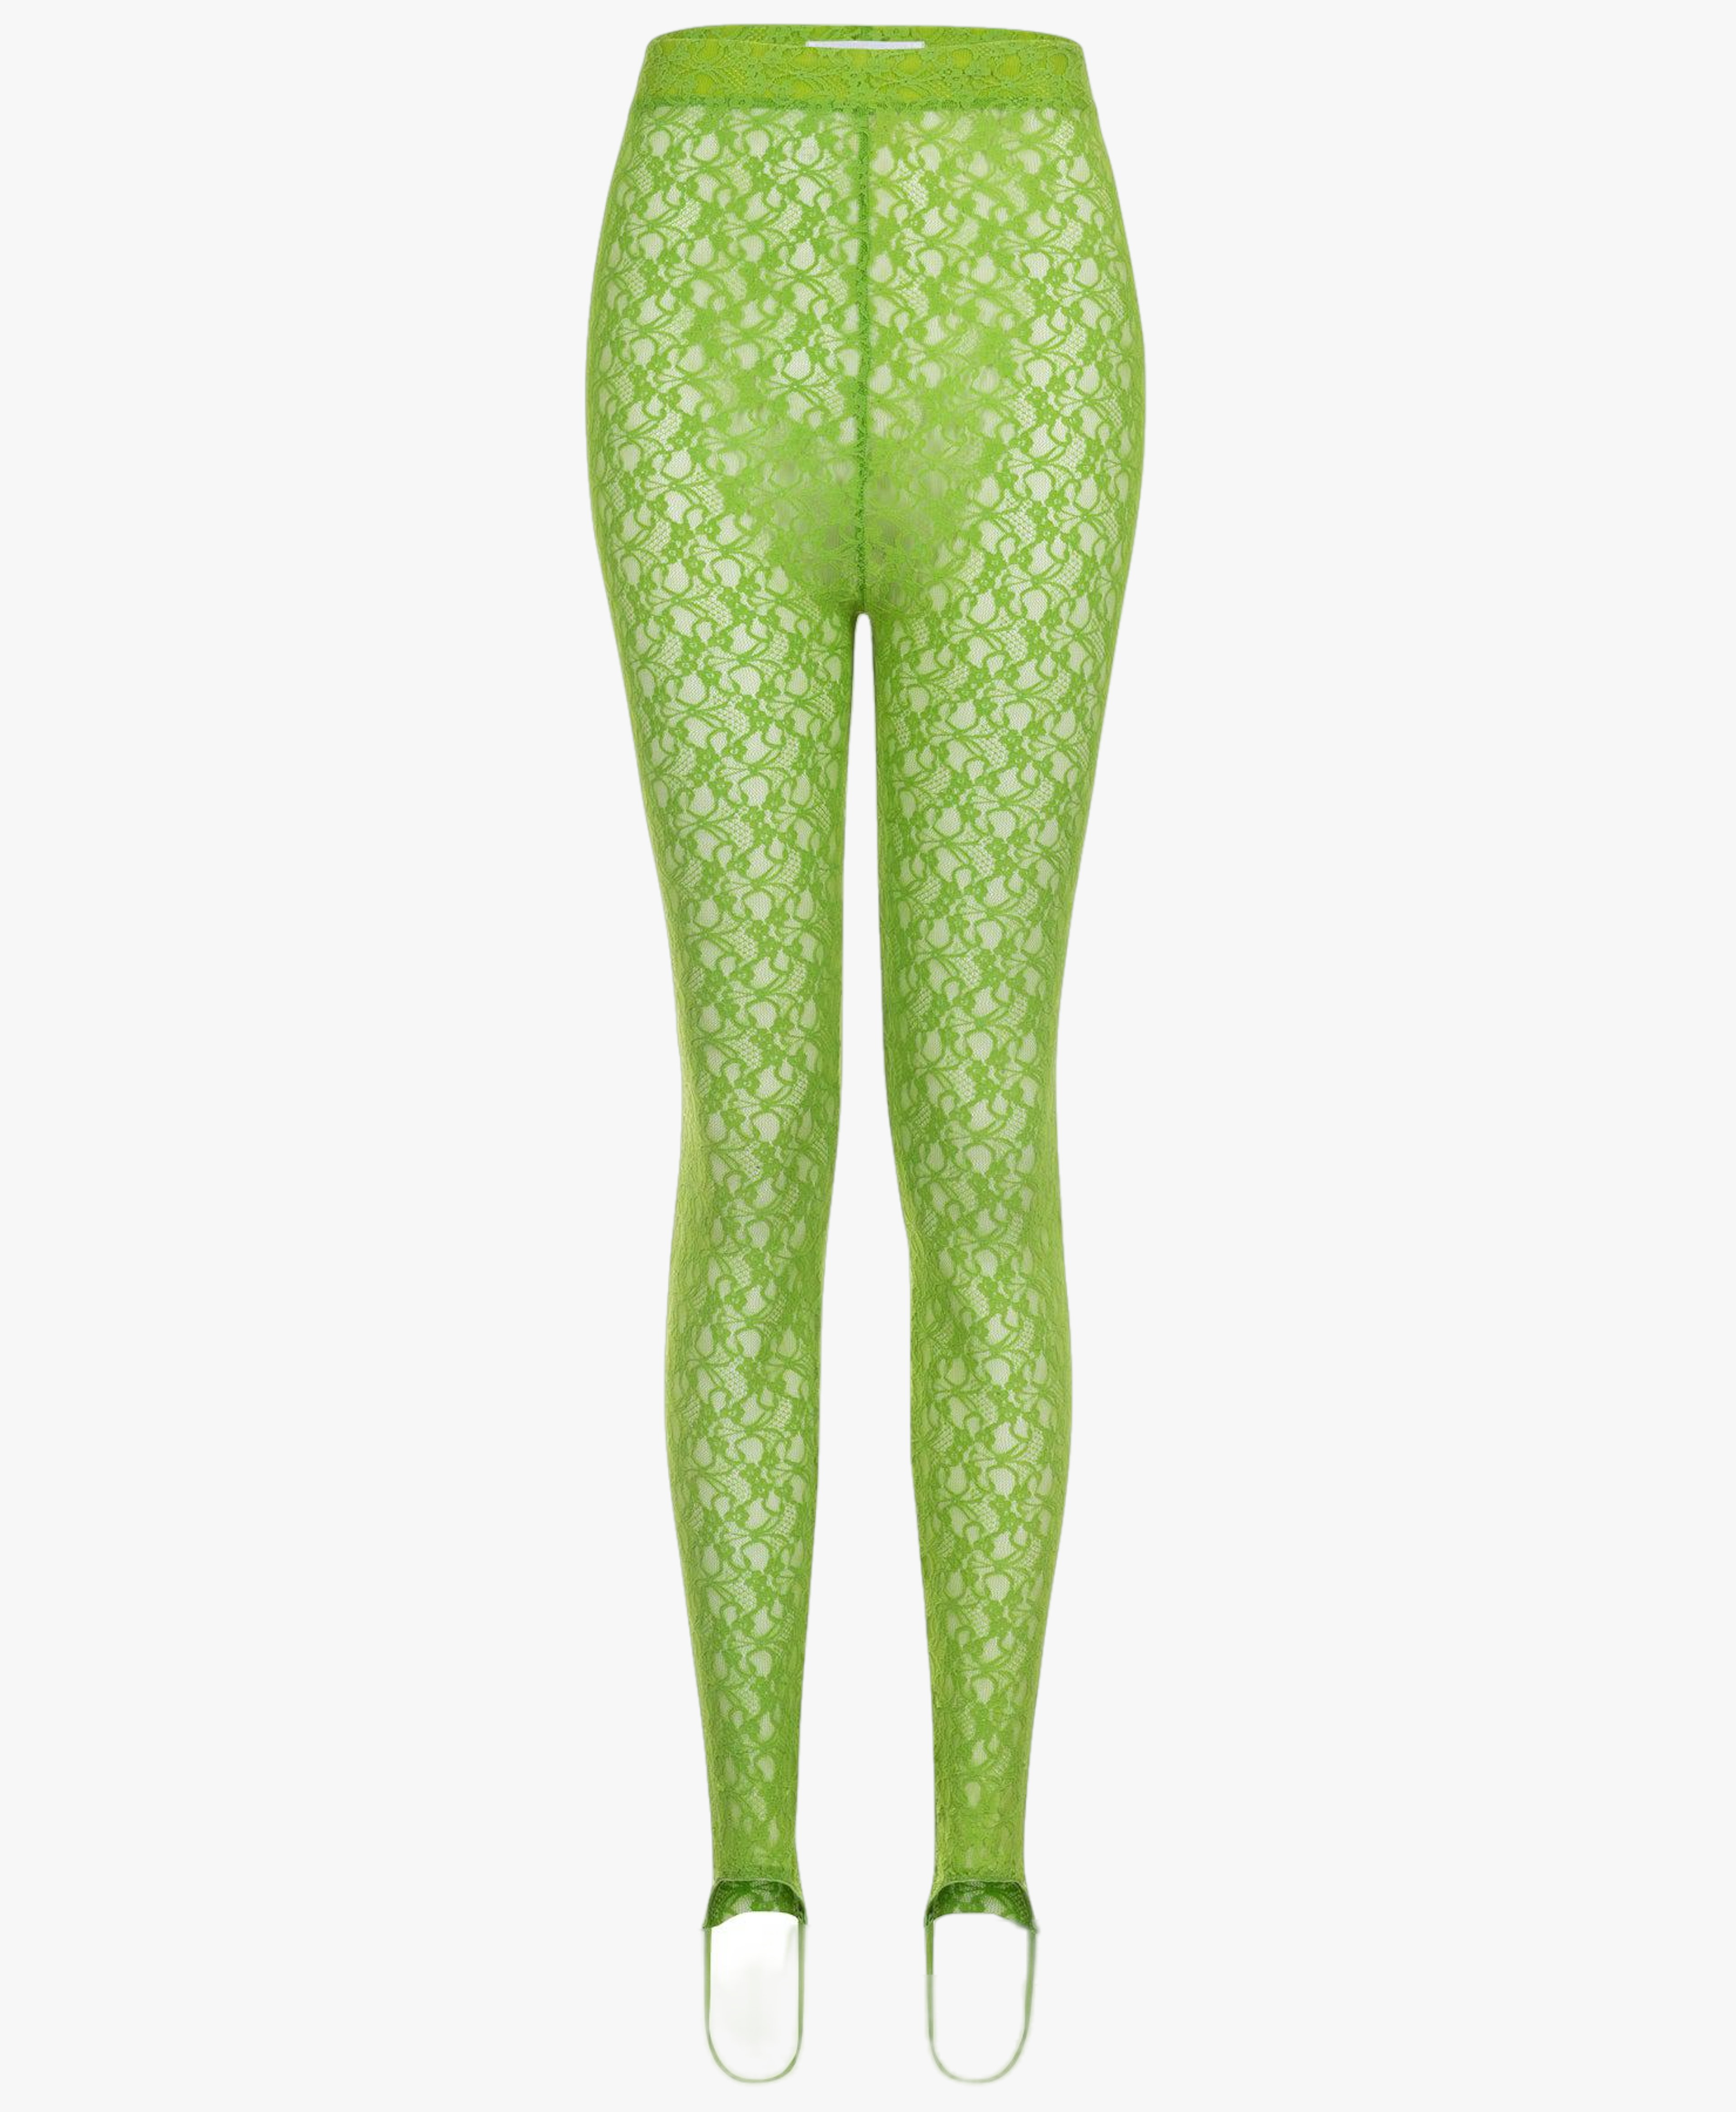 Shop Sadie Lime Green Lace Stirrup Leggings- Made to Order from Natalie and  Alanna at Seezona